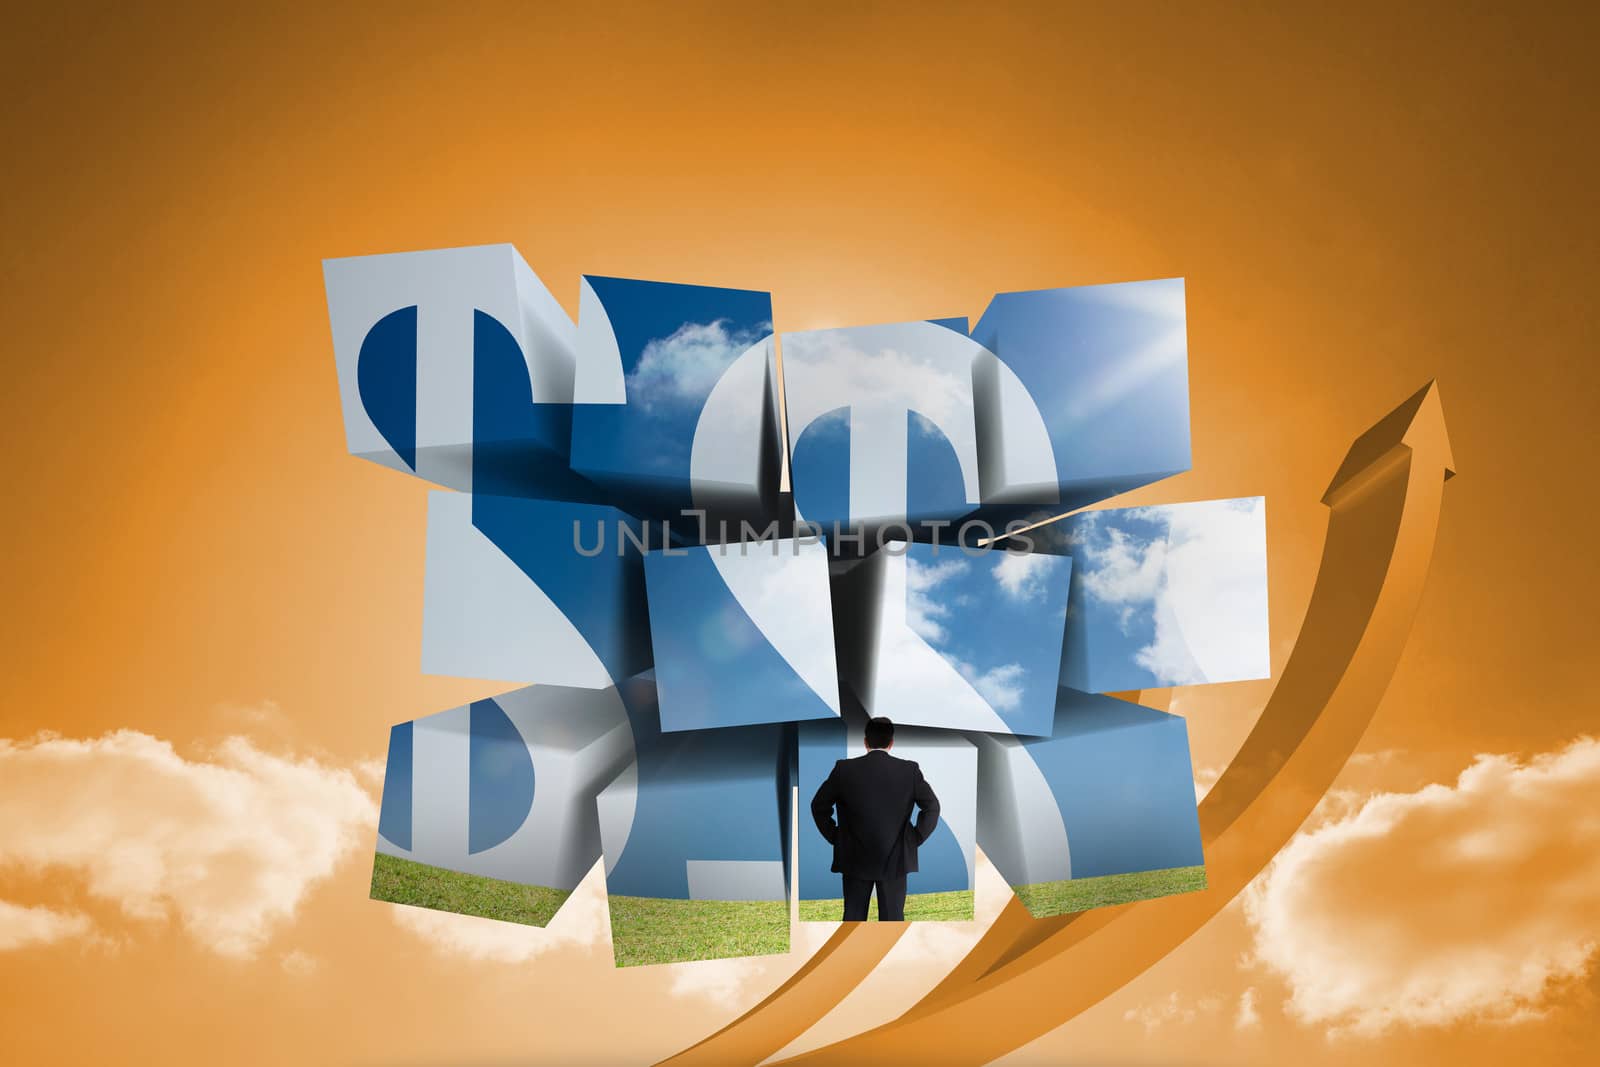 Businessman and dollar signs on abstract screen against arrows in the sky in orange